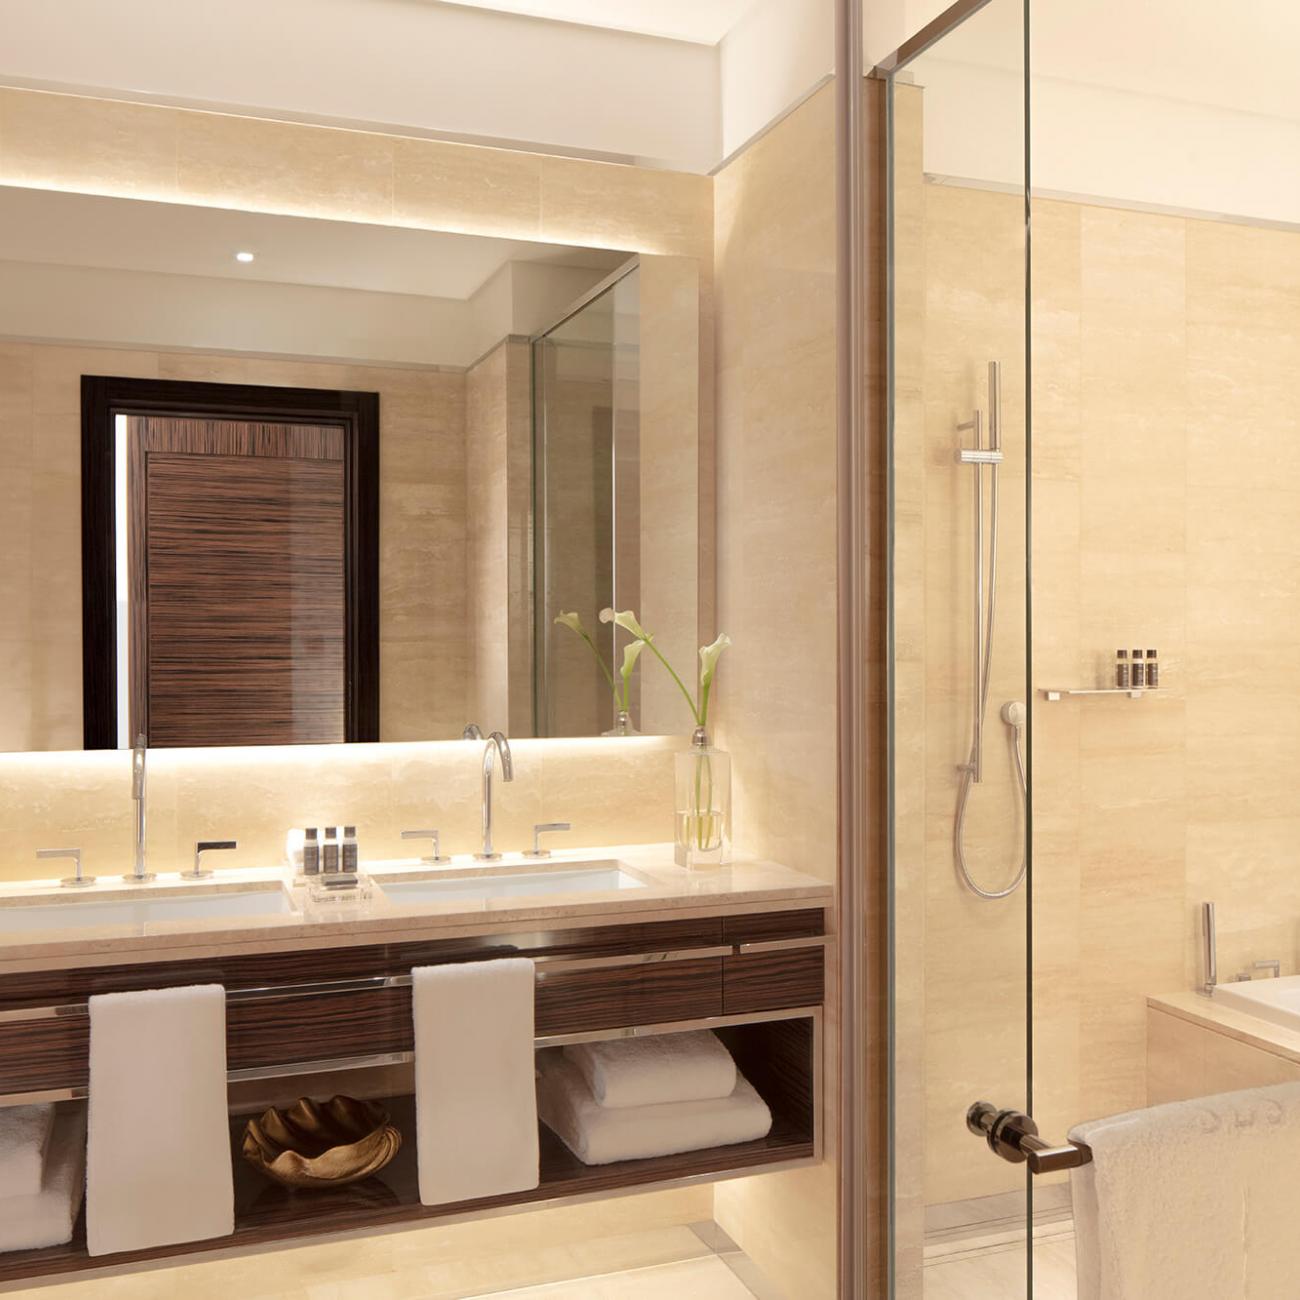 A large bathroom with 2 sinks on the background, with a walk in section with shower and bathtub on the right